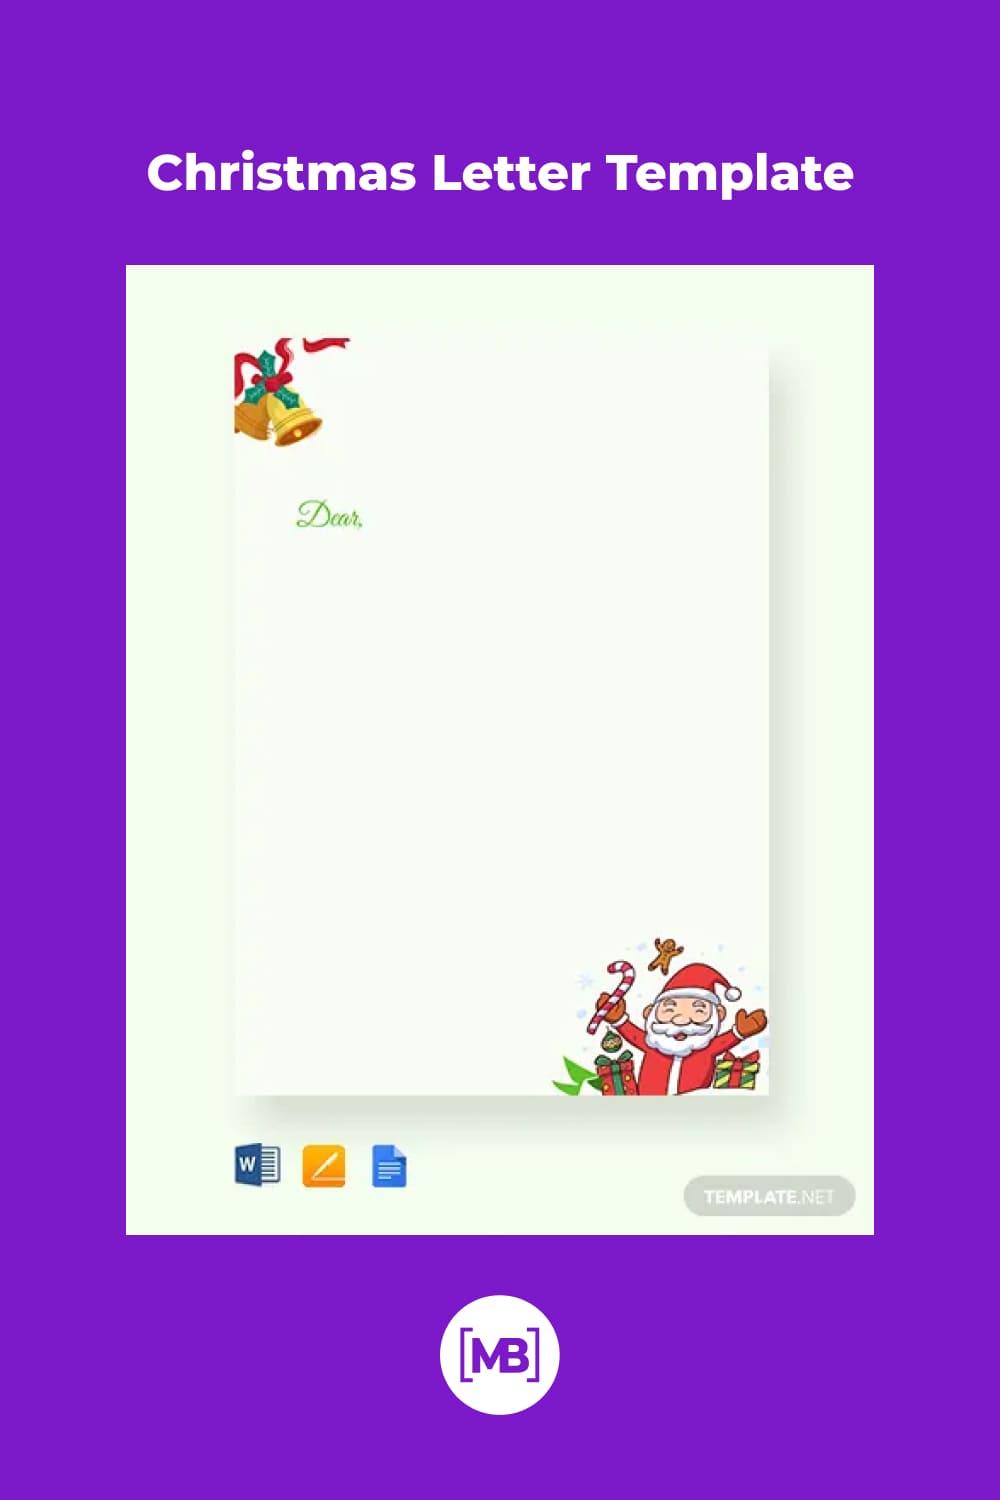 Christmas is a fun and joyous time of the year. So, to convey the holiday spirit through your letters.